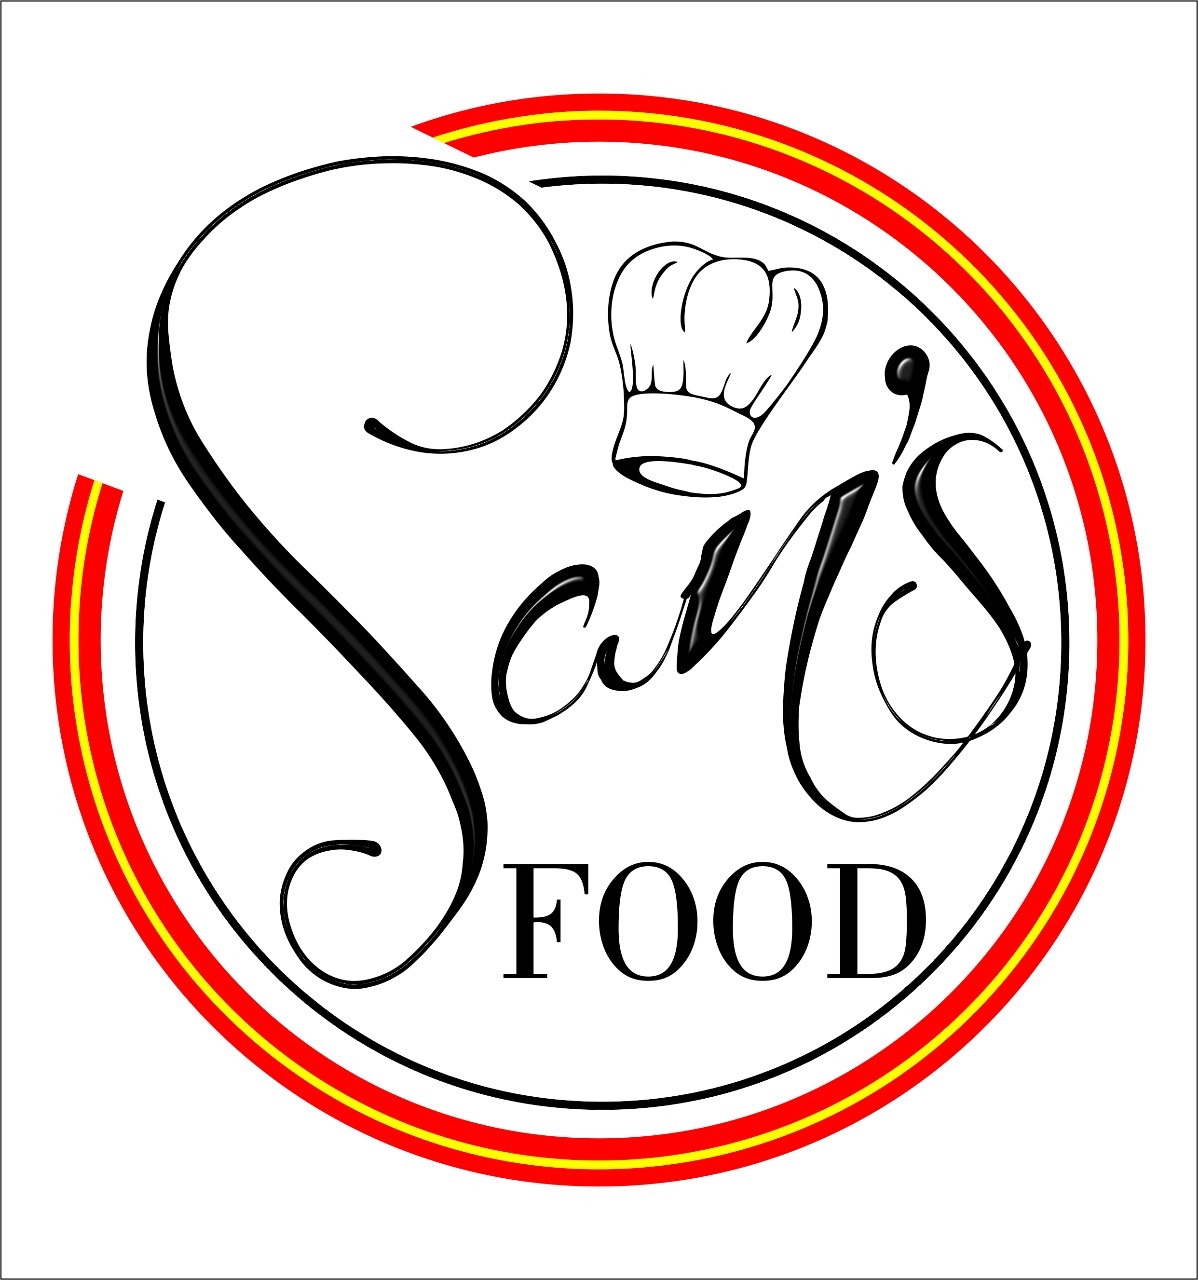 <strong>San's Food</strong>